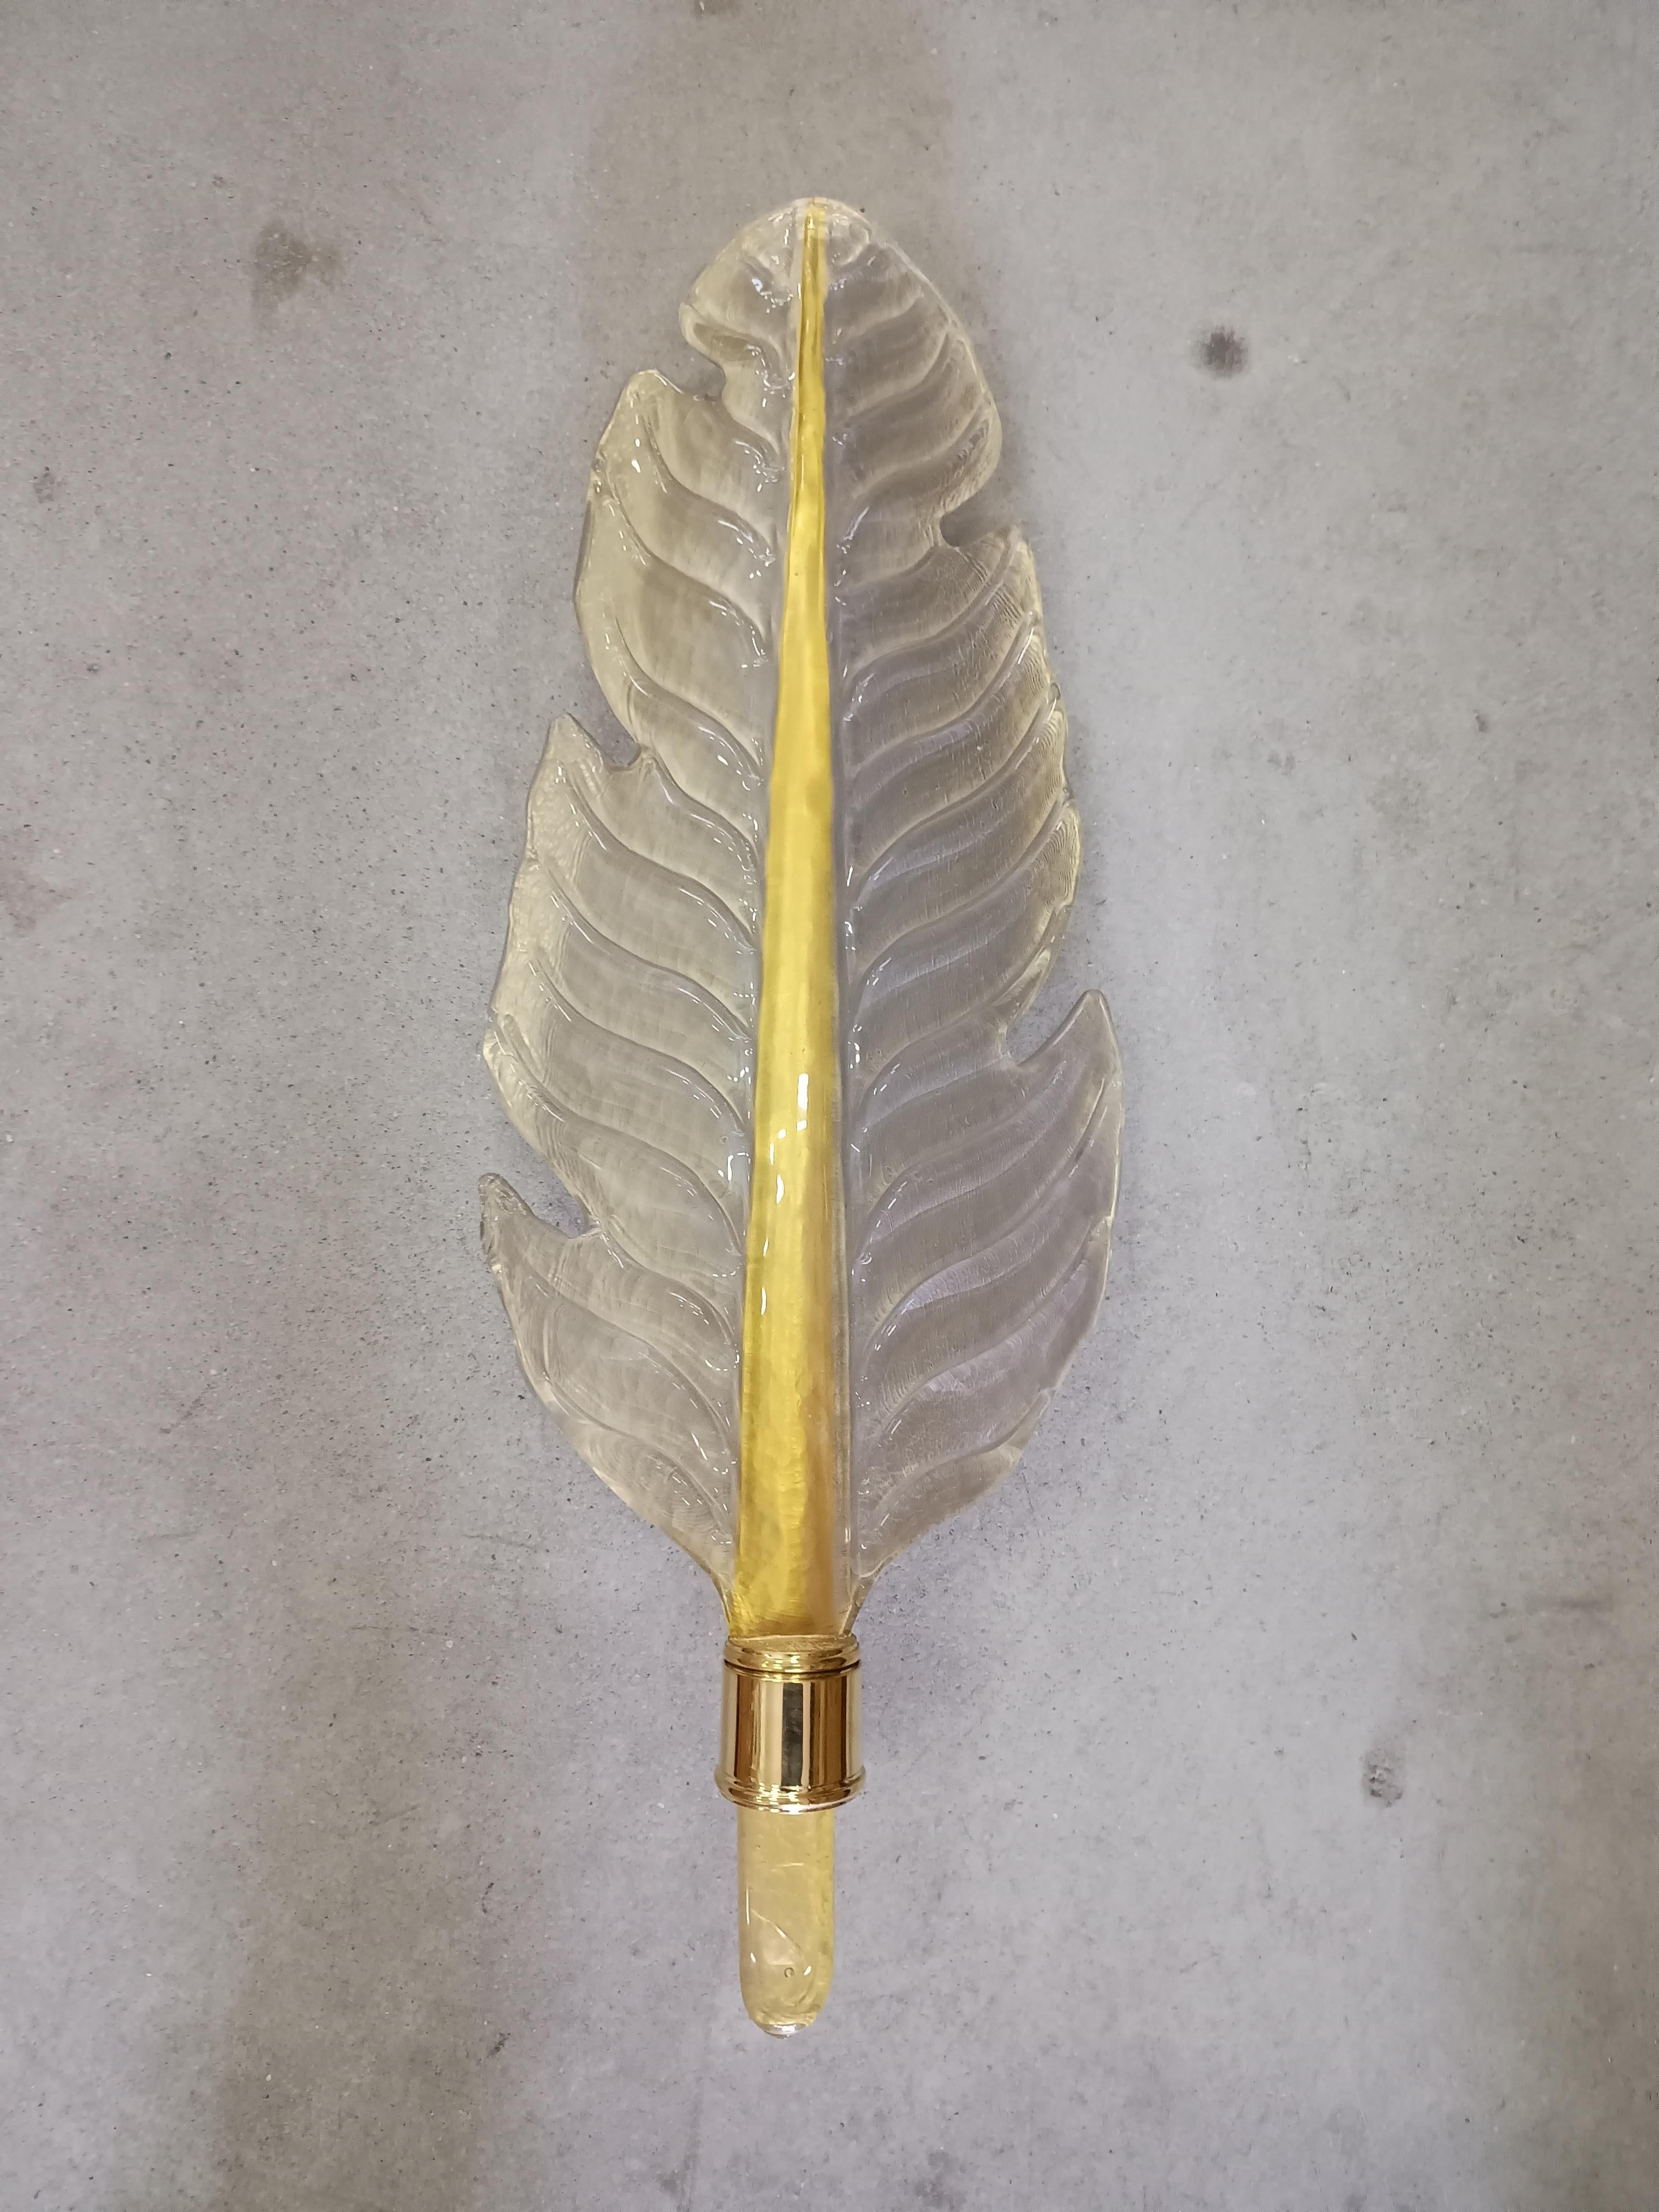 Majestic Murano blown glass leaf with a wonderful white and gold color, made even more beautiful by its polished brass structure. The Murano furnaces create an indisputable timeless design

The wall light is composed of a brass structure that is